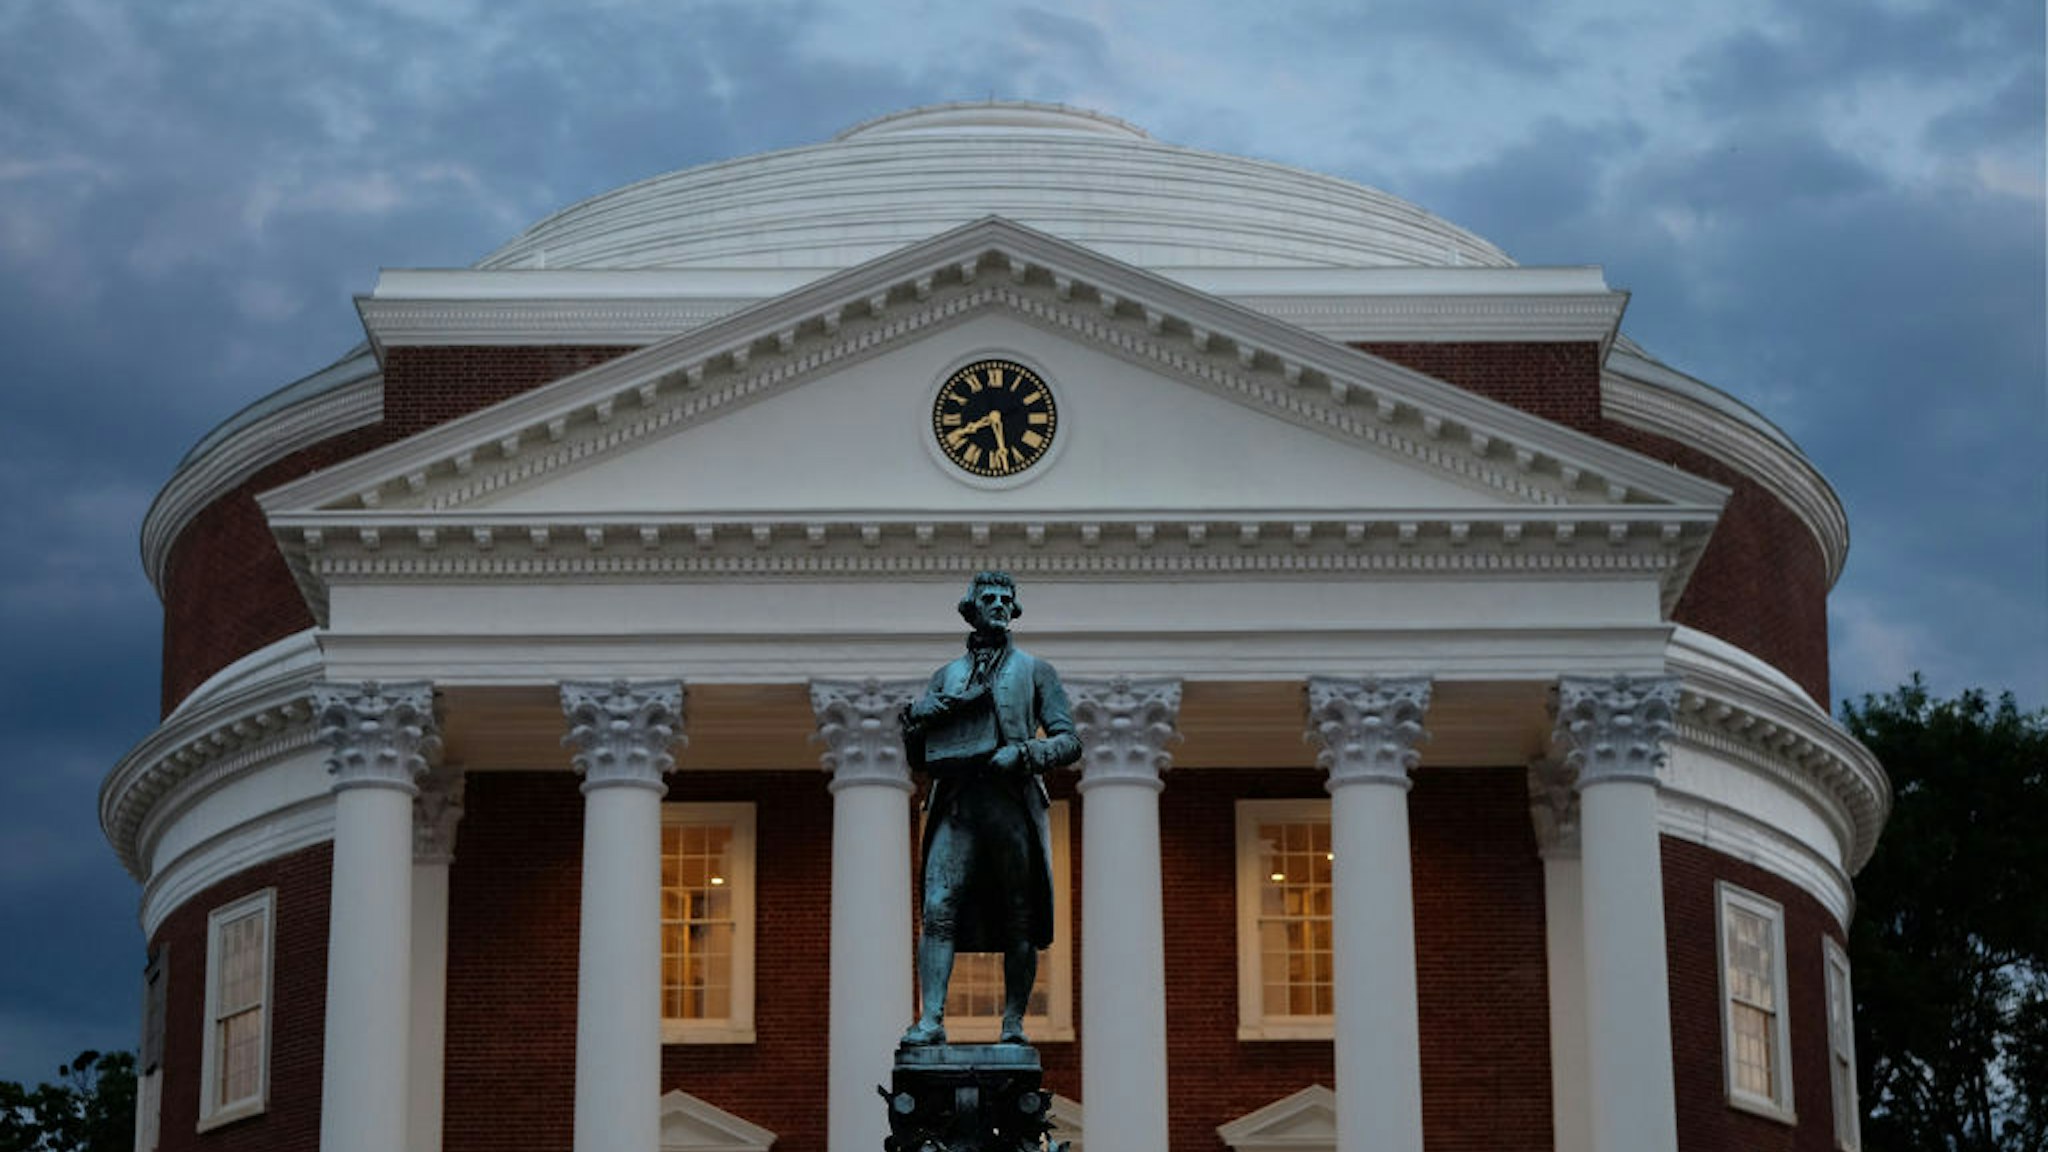 A statue of Thomas Jefferson stands in front of the Rotunda at the University of Virginia, Friday June 10, 2016.